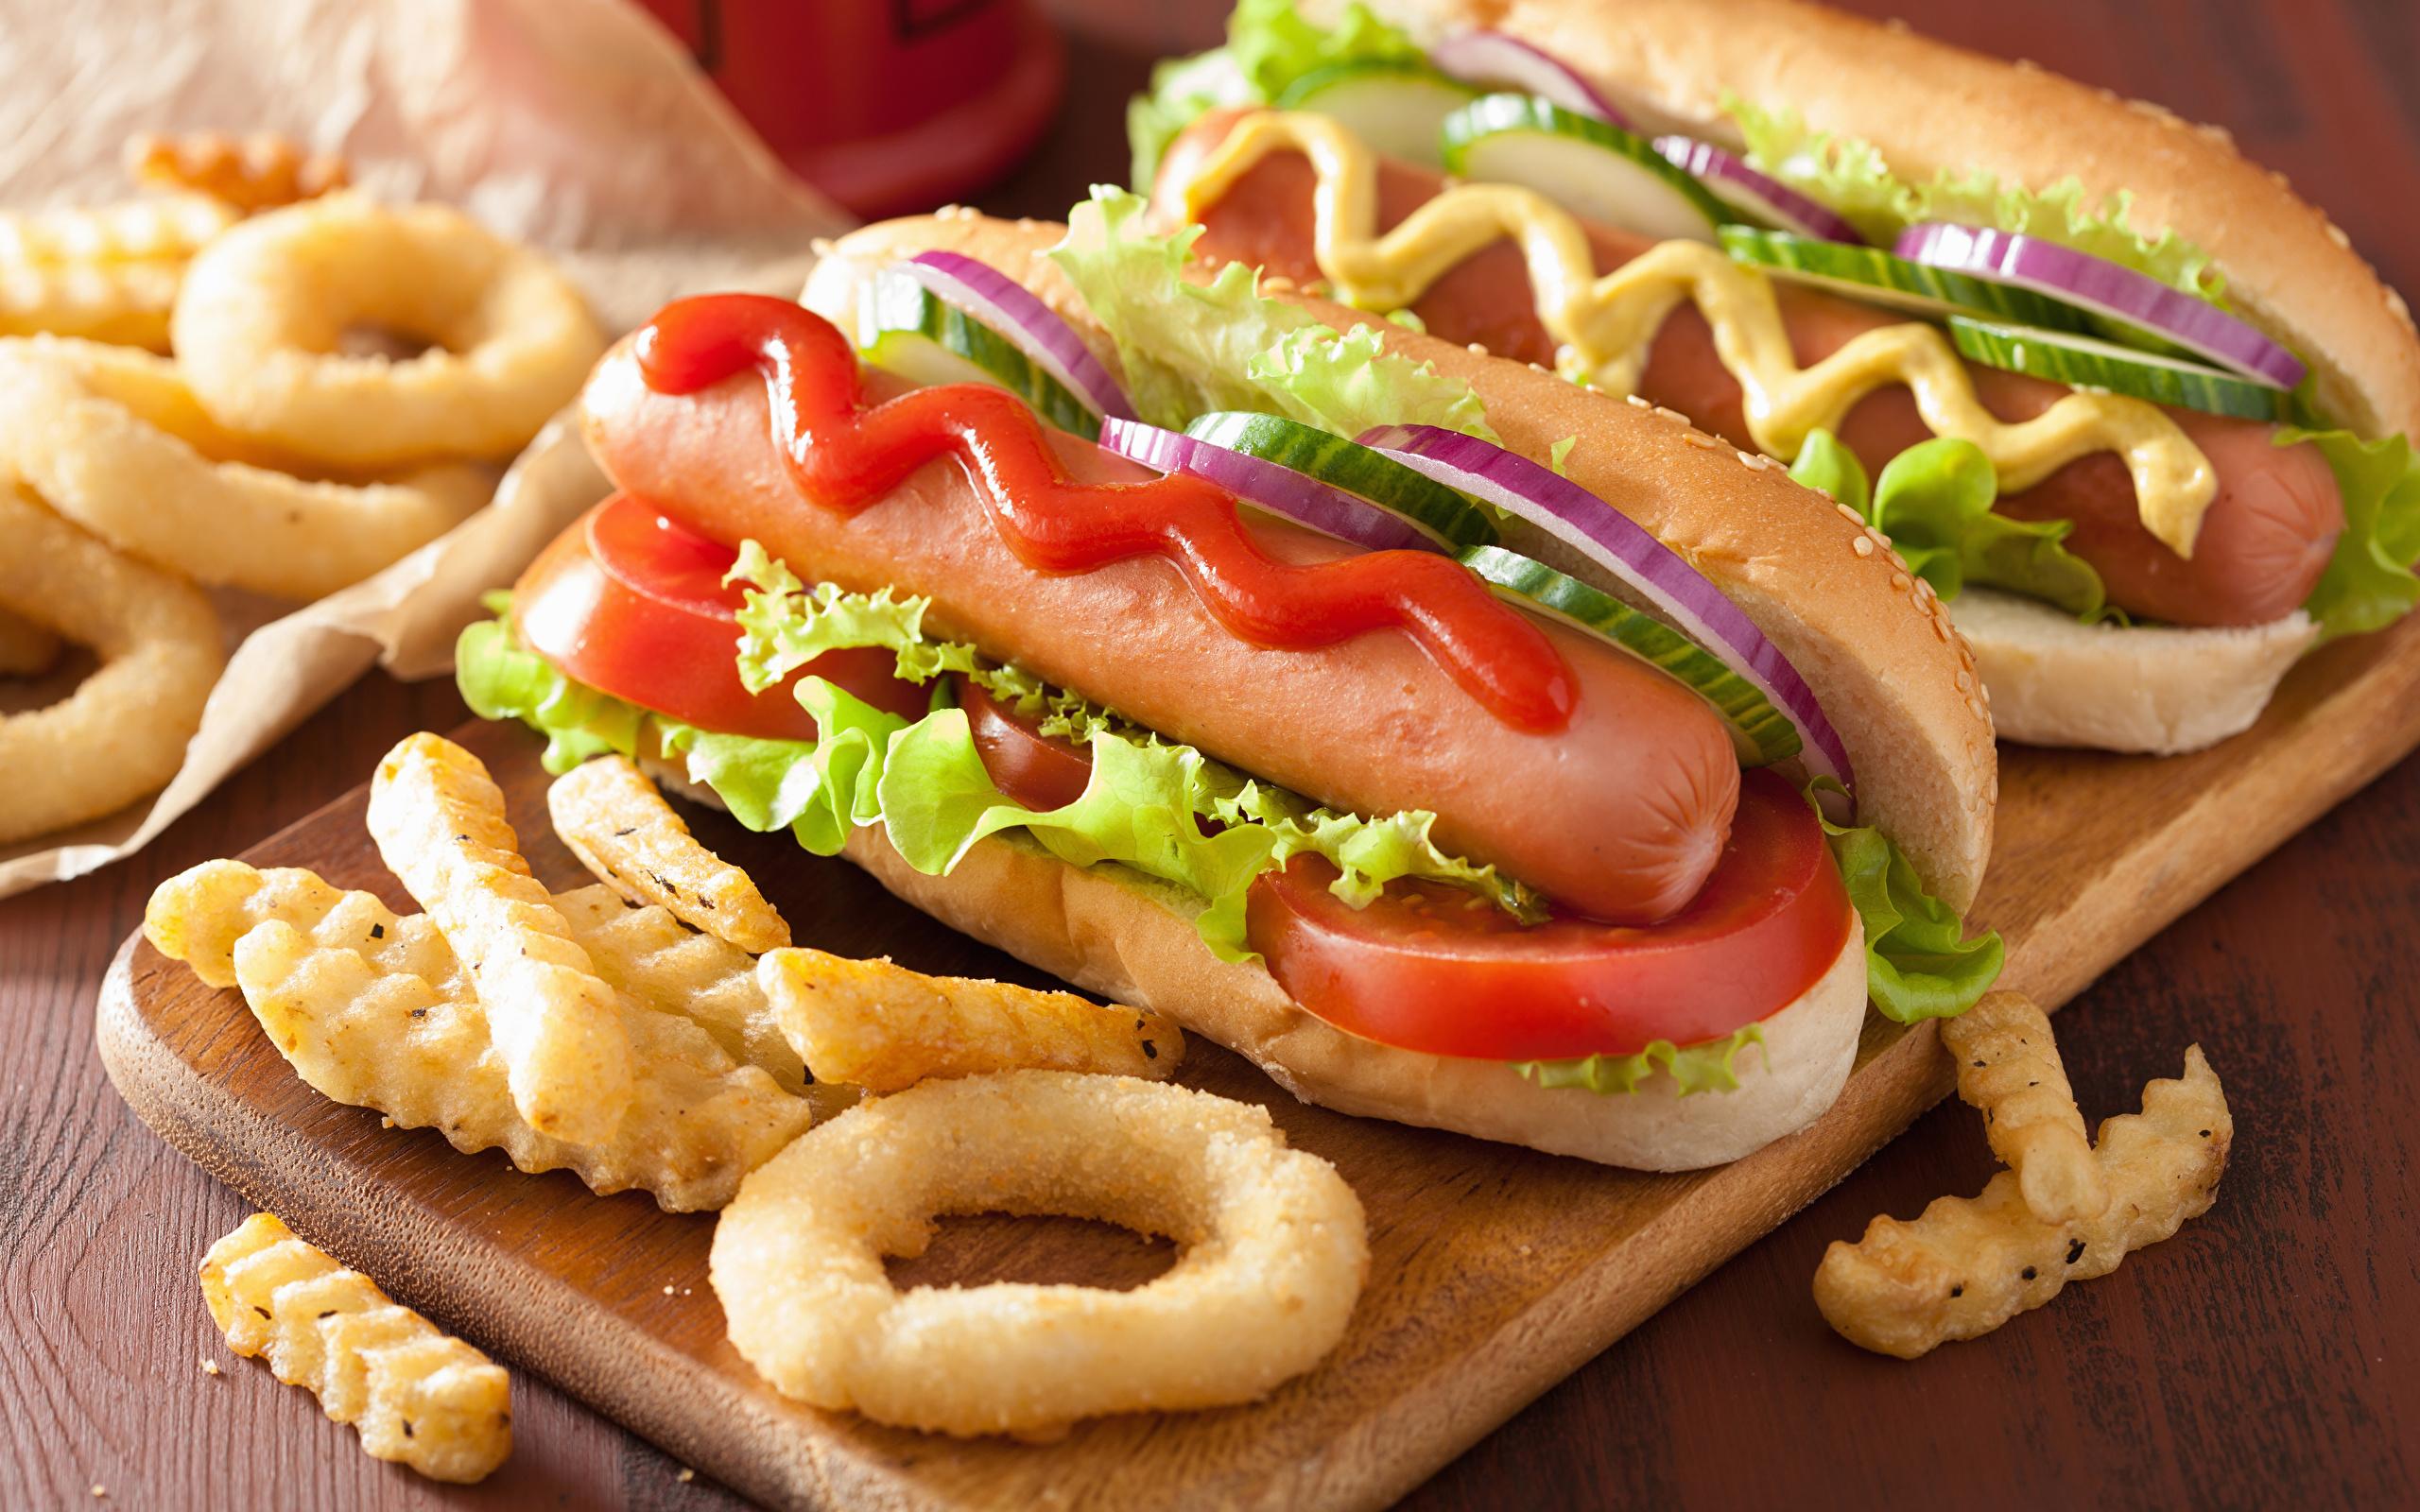 Hot Dog Wallpaper Image Collections Of